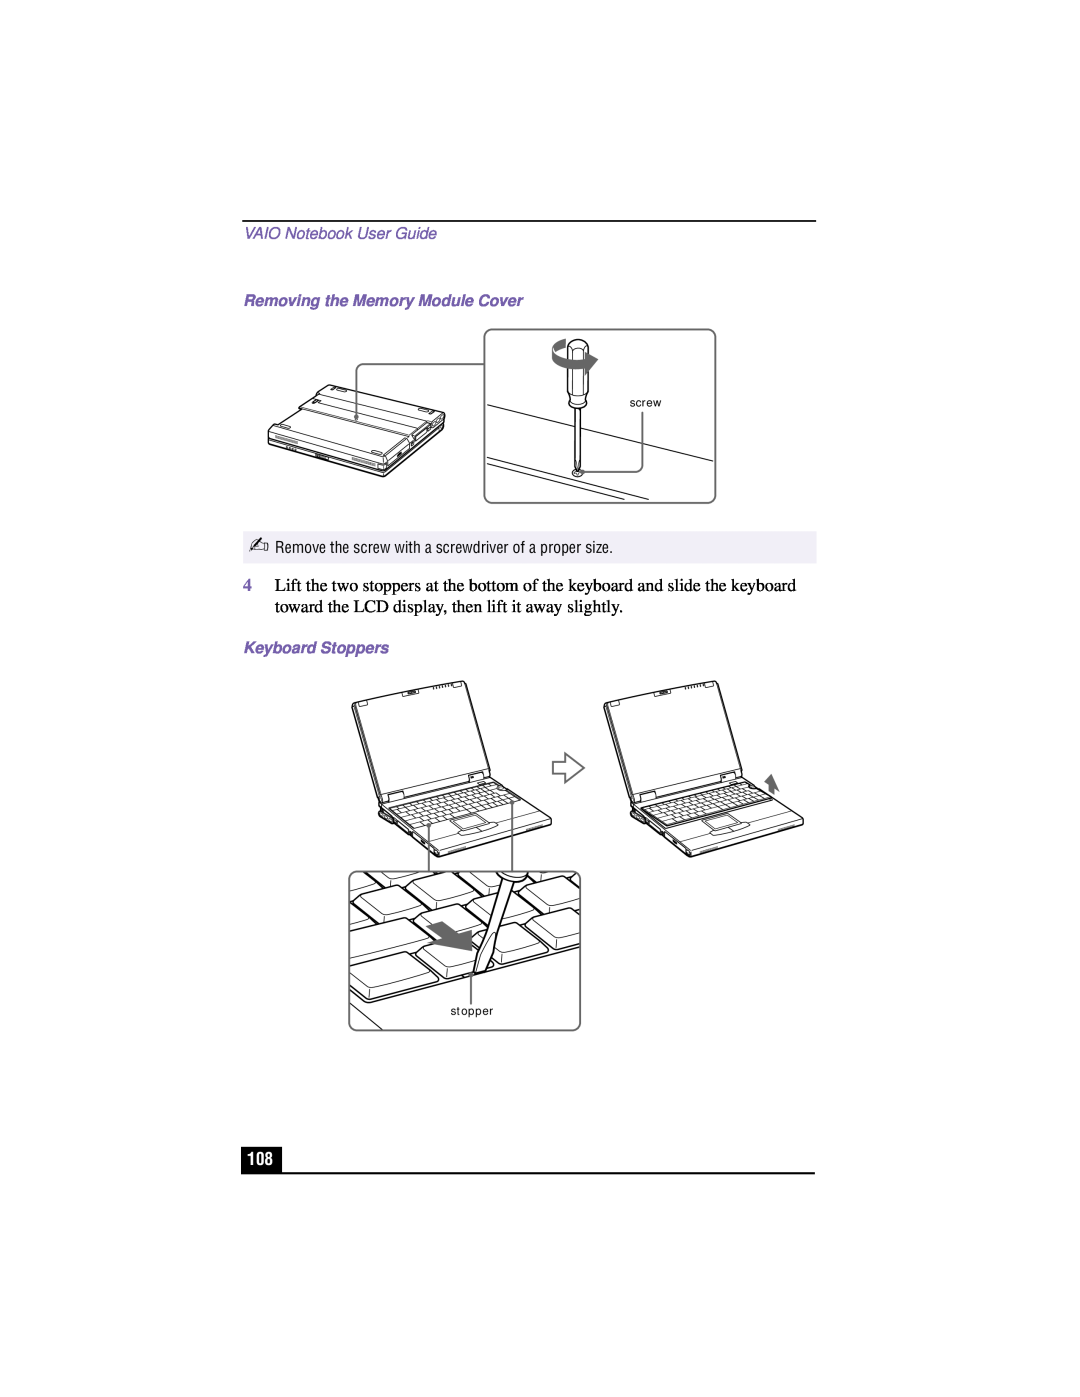 Sony PCG-XG700K, PCG-XG500 VAIO Notebook User Guide, Removing the Memory Module Cover, Keyboard Stoppers, screw, stopper 